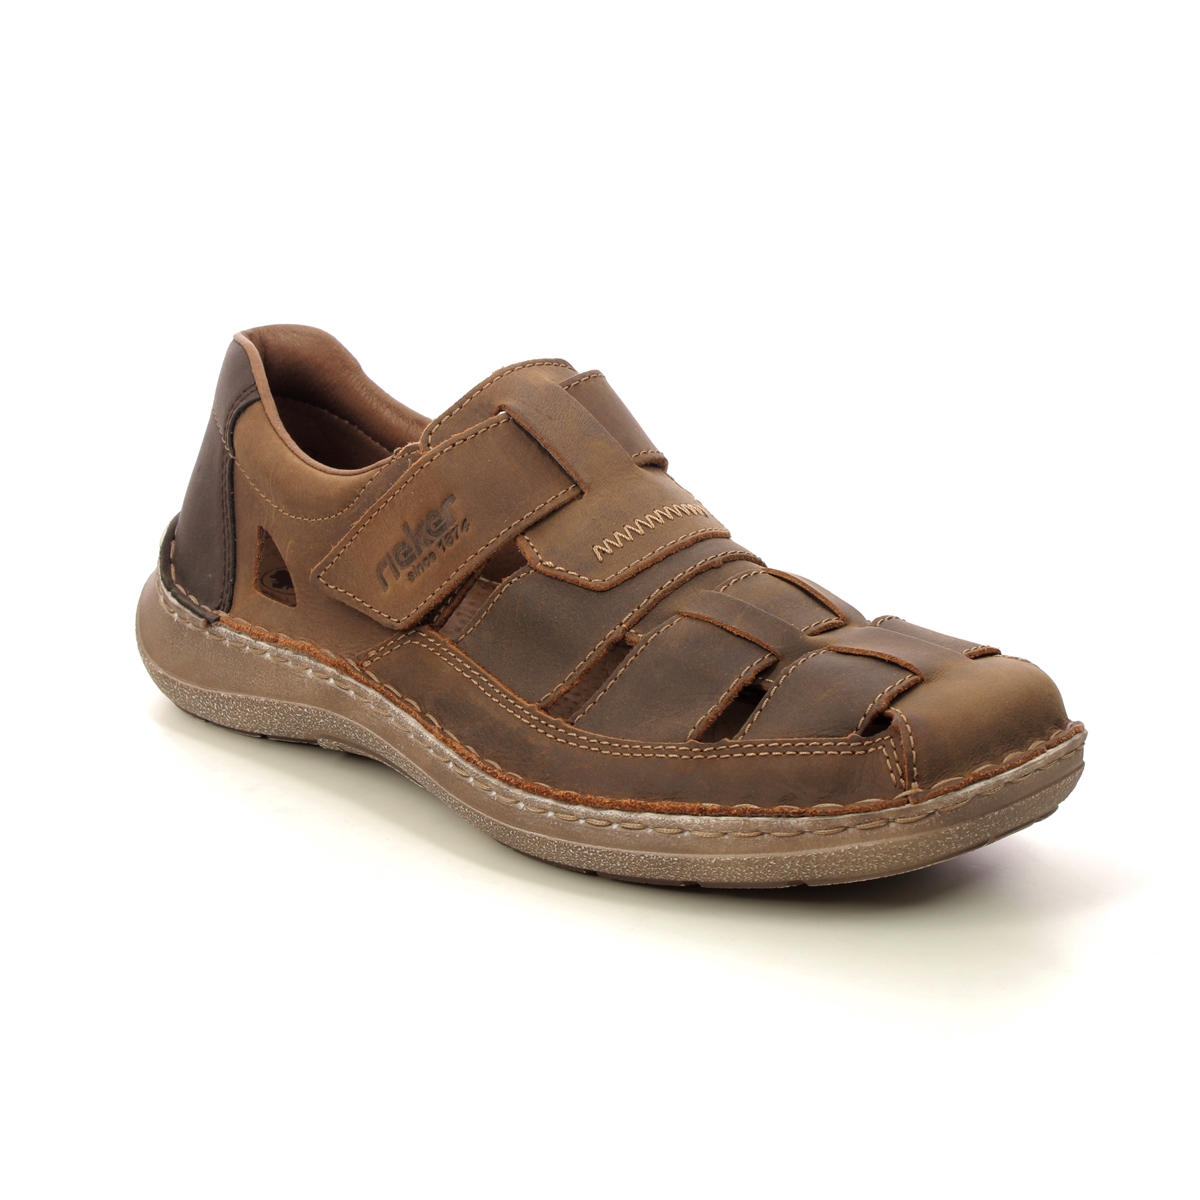 Rieker 03078-25 Brown leather Mens sandals in a Plain Leather in Size 44